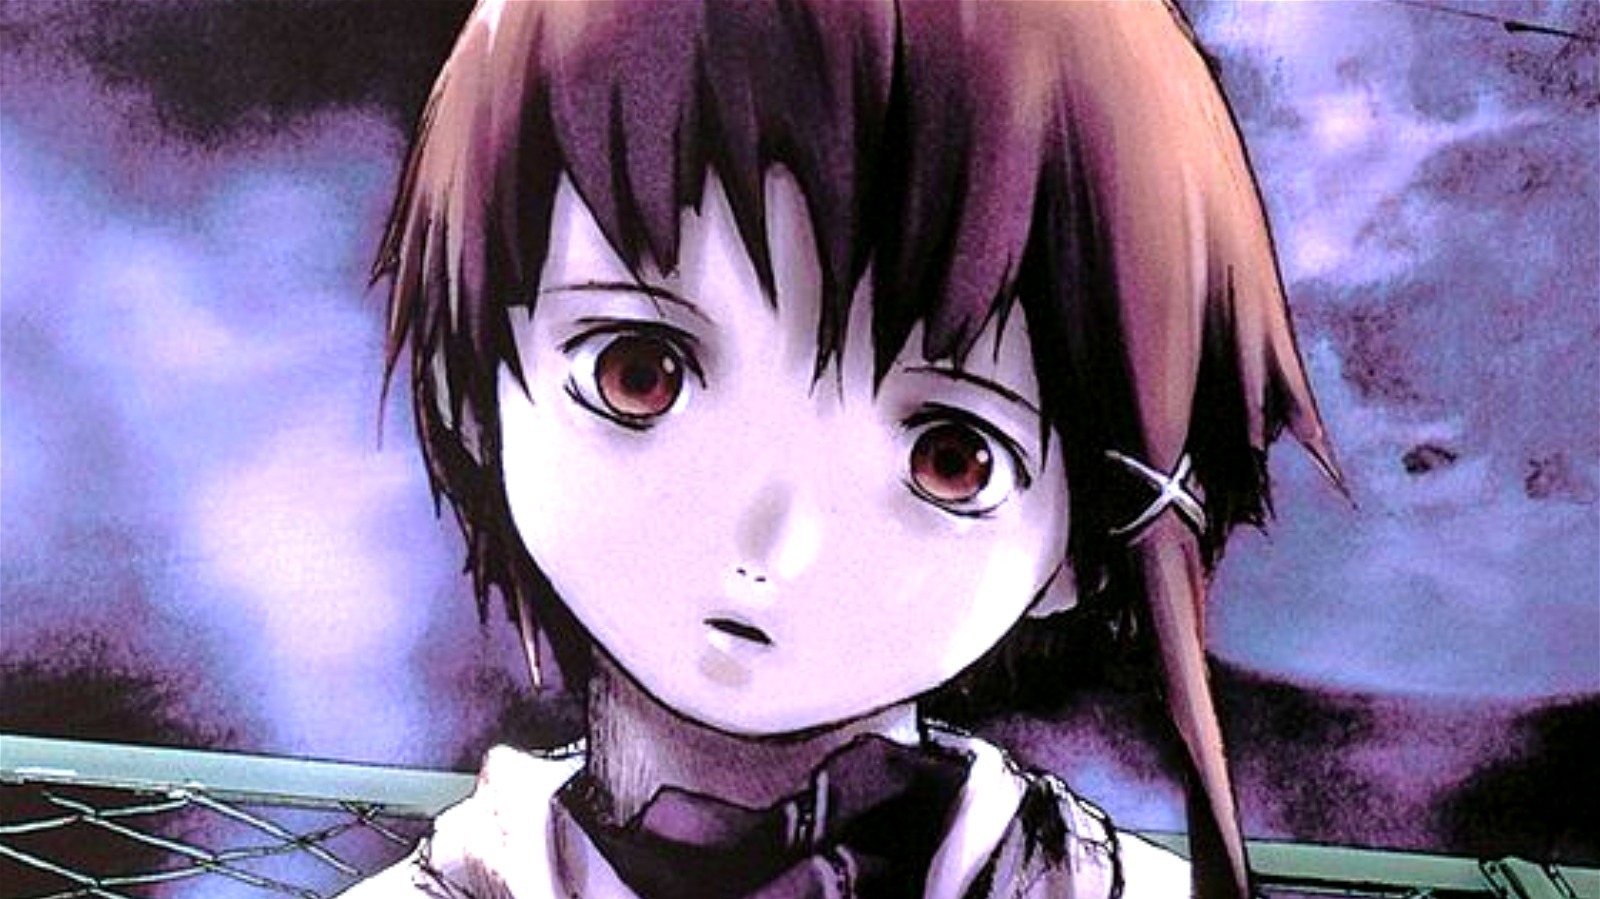 serial experiments lain opening song